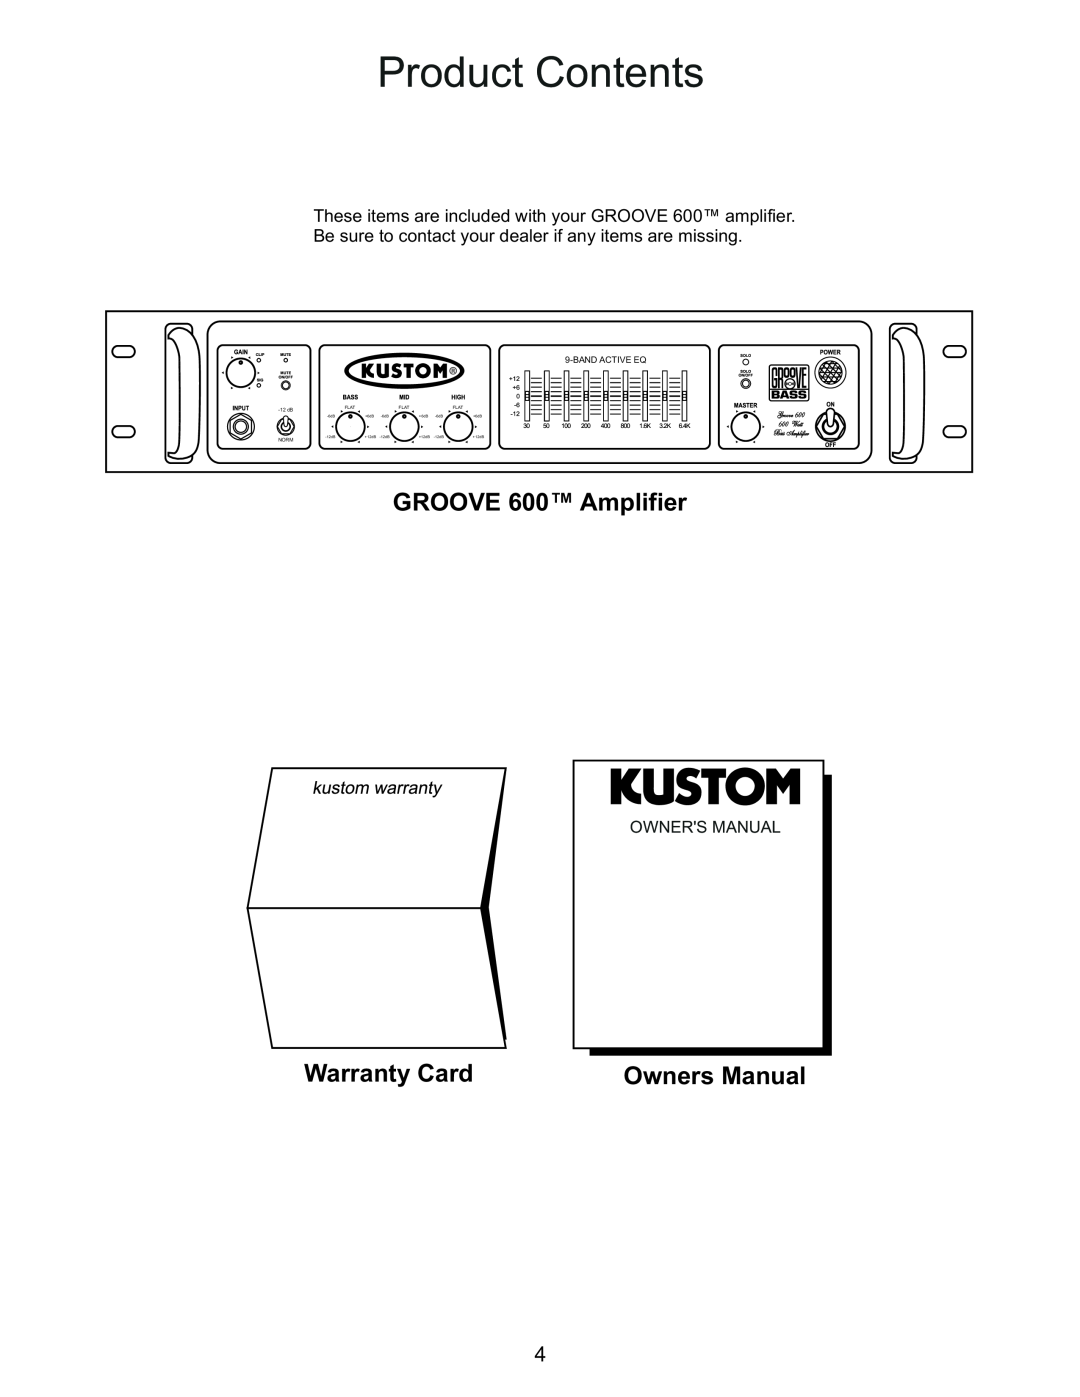 Kustom GROOVE 600TM owner manual Product Contents, GROOVE 600 Amplifier, Warranty Card, Bandactive Eq, 12dB, Norm 